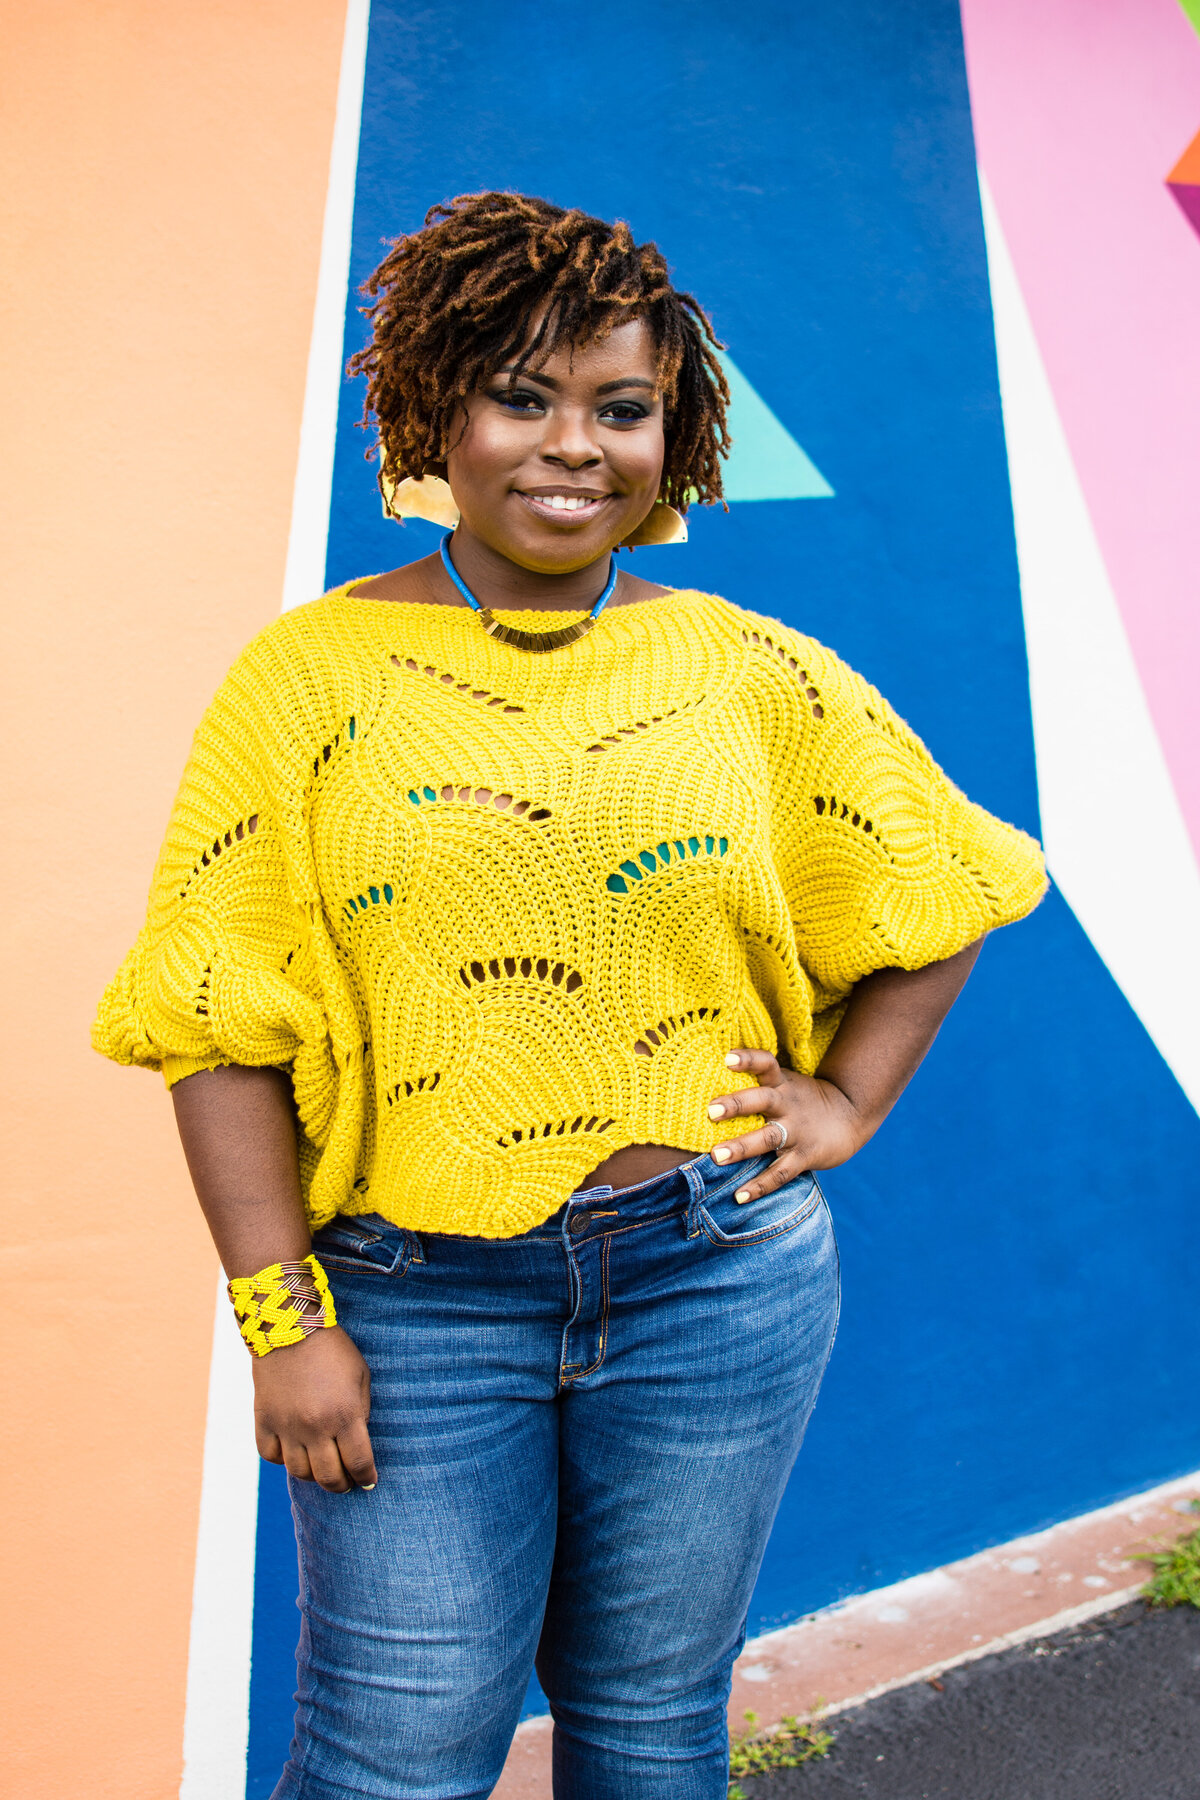 Annie Brown poses in a yellow crochet top and jeans in front of a colorful mural